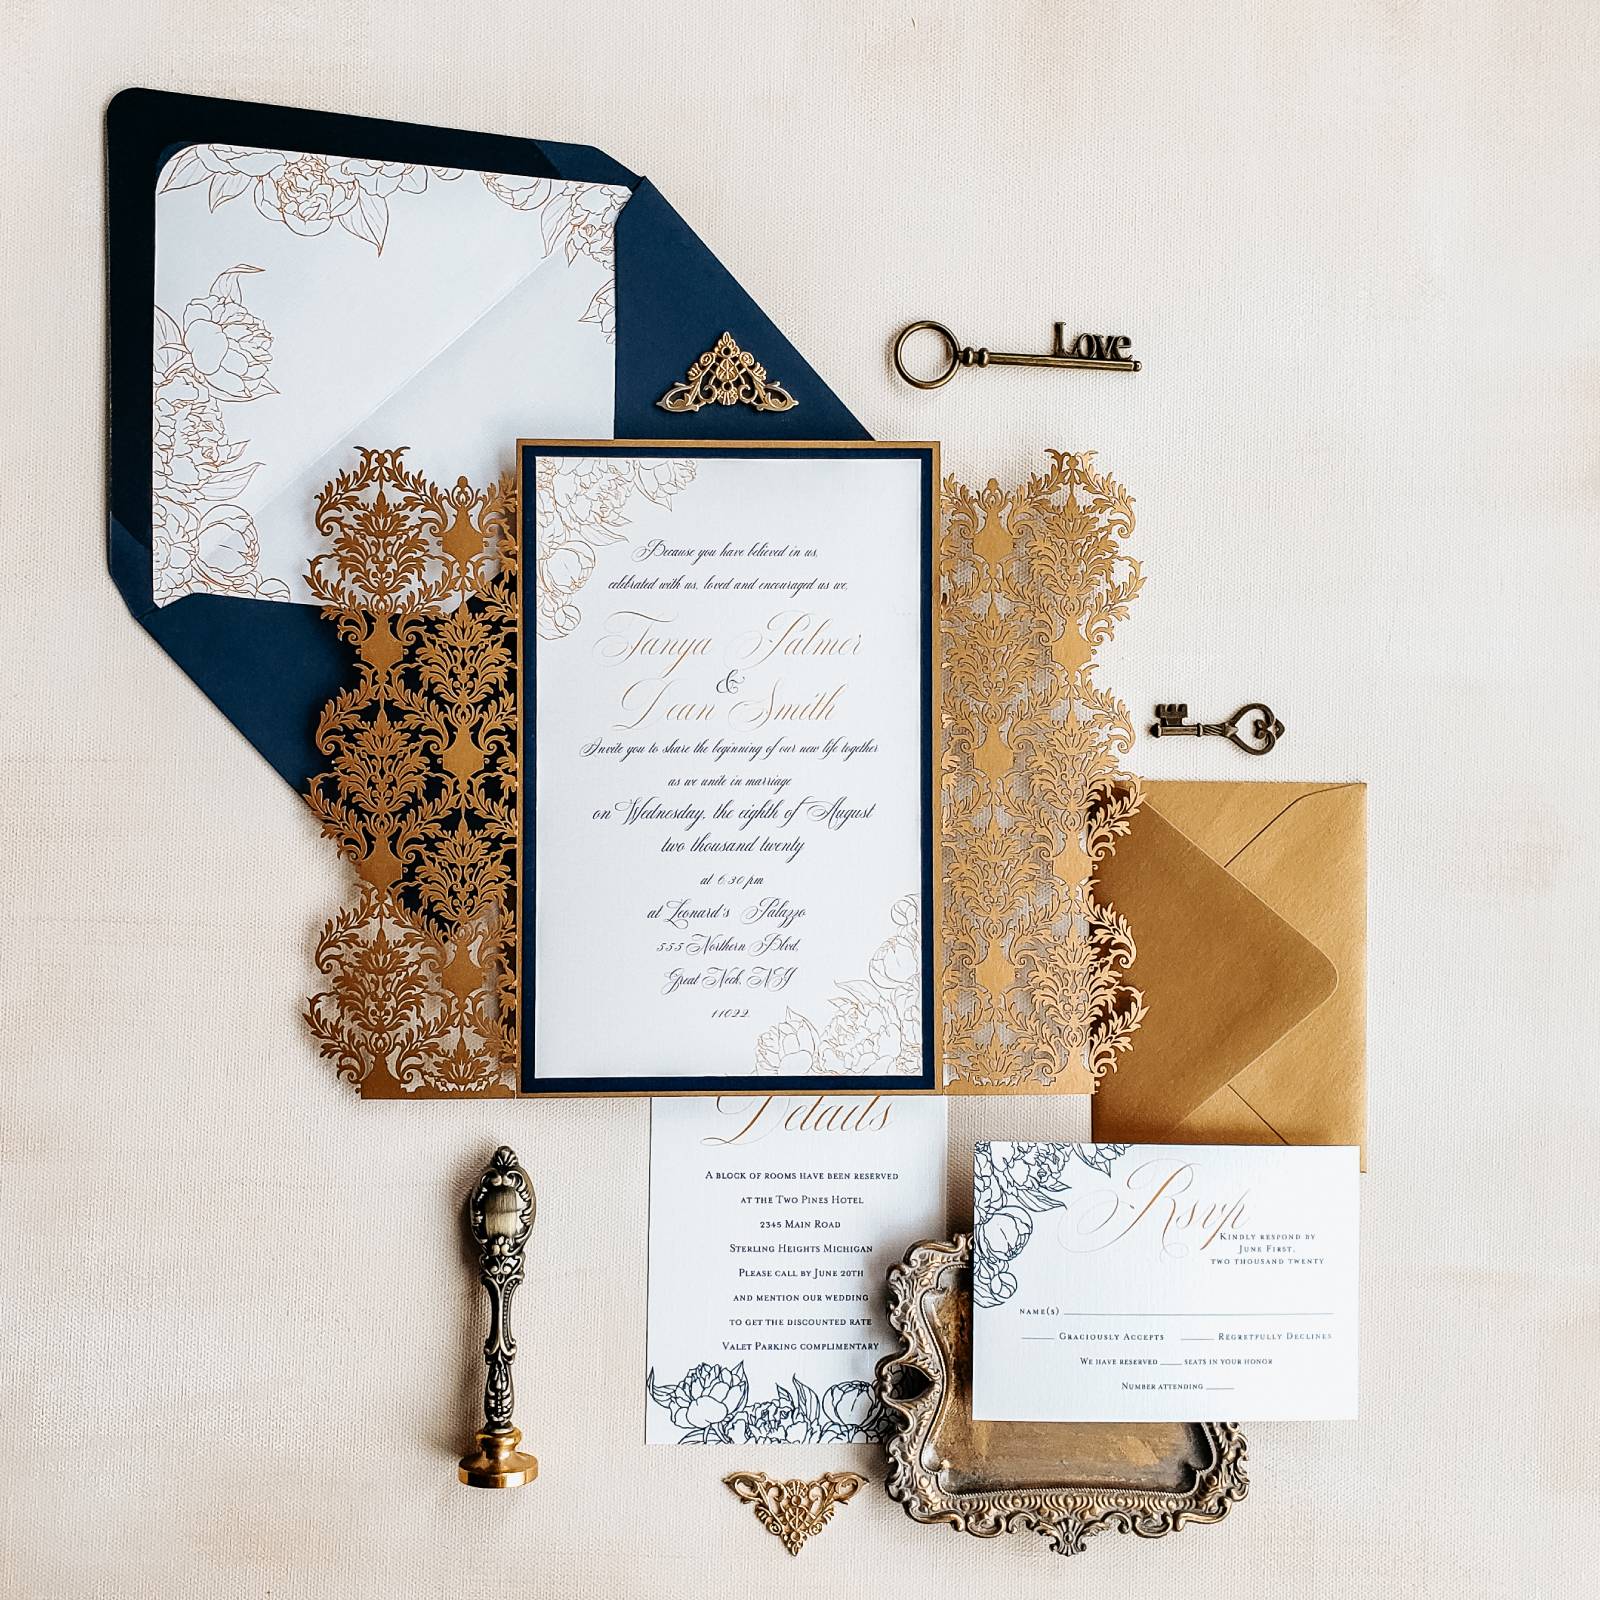 [vc_row][vc_column][vc_column_text]Purchase this listing to get a sample of our Lyon wedding invitation suite.

The sample includes:

• 5.5